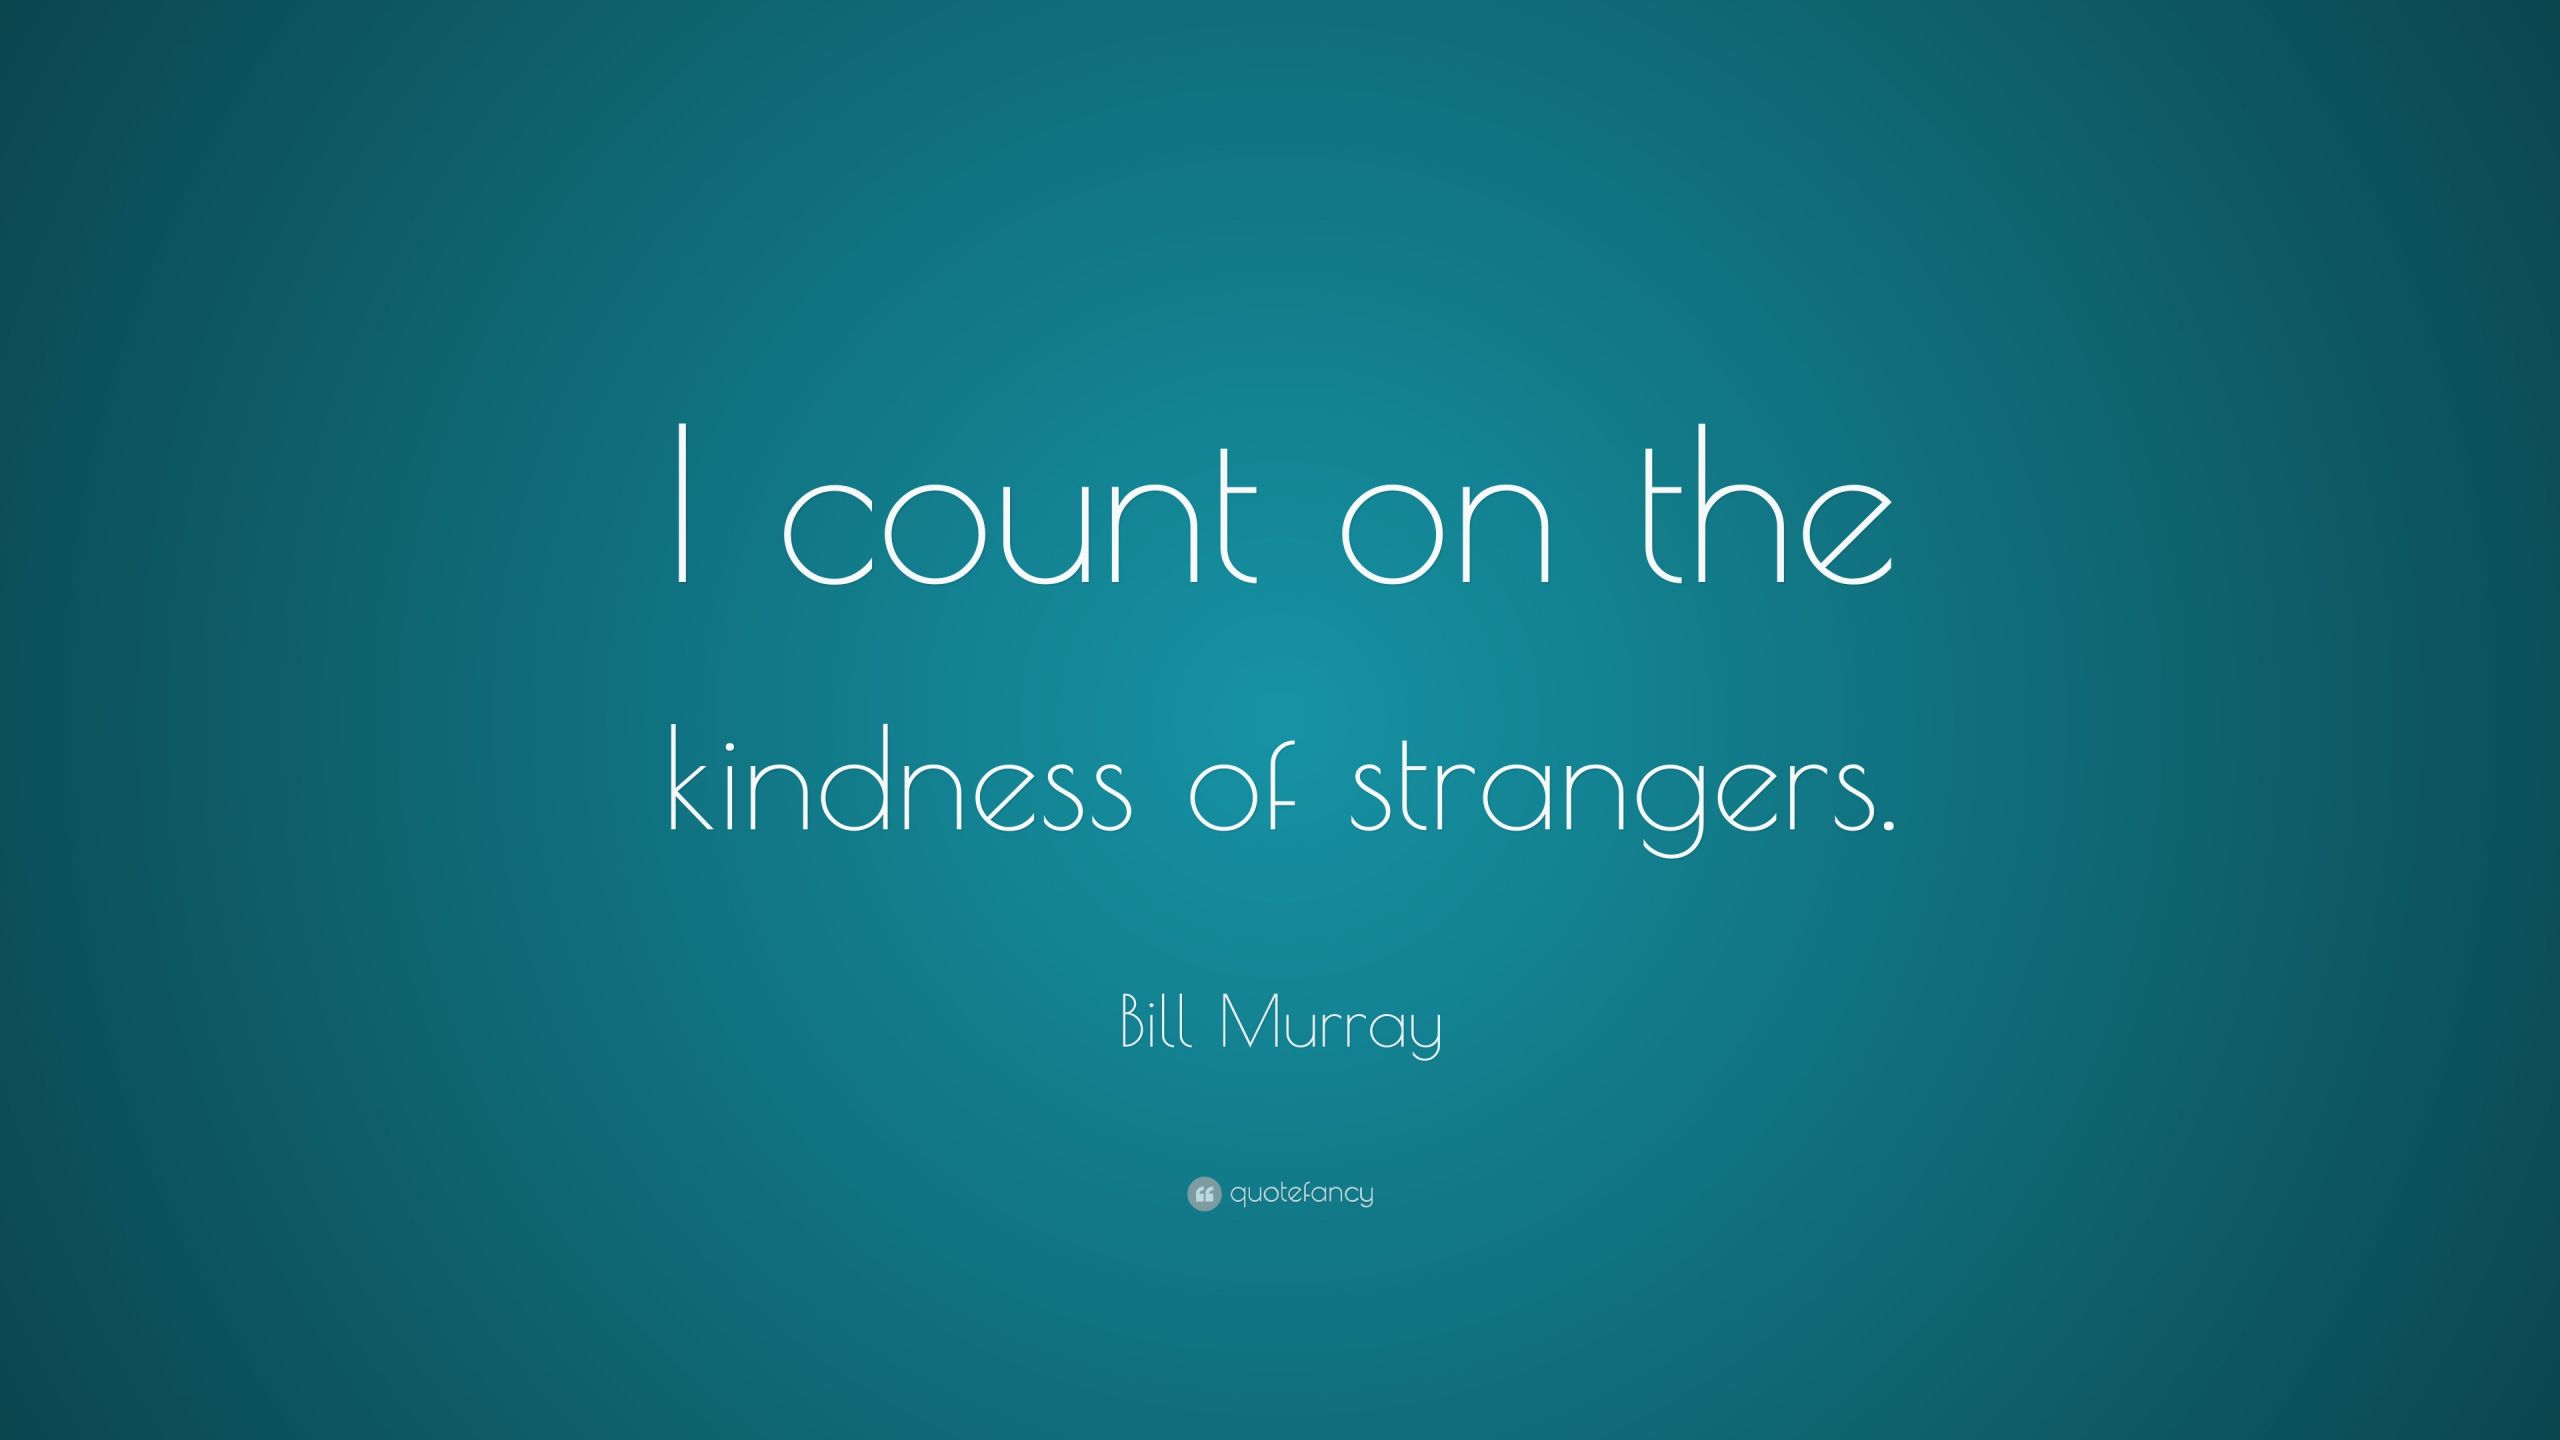 Kindness Of Strangers Quotes
 Bill Murray Quotes 100 wallpapers Quotefancy